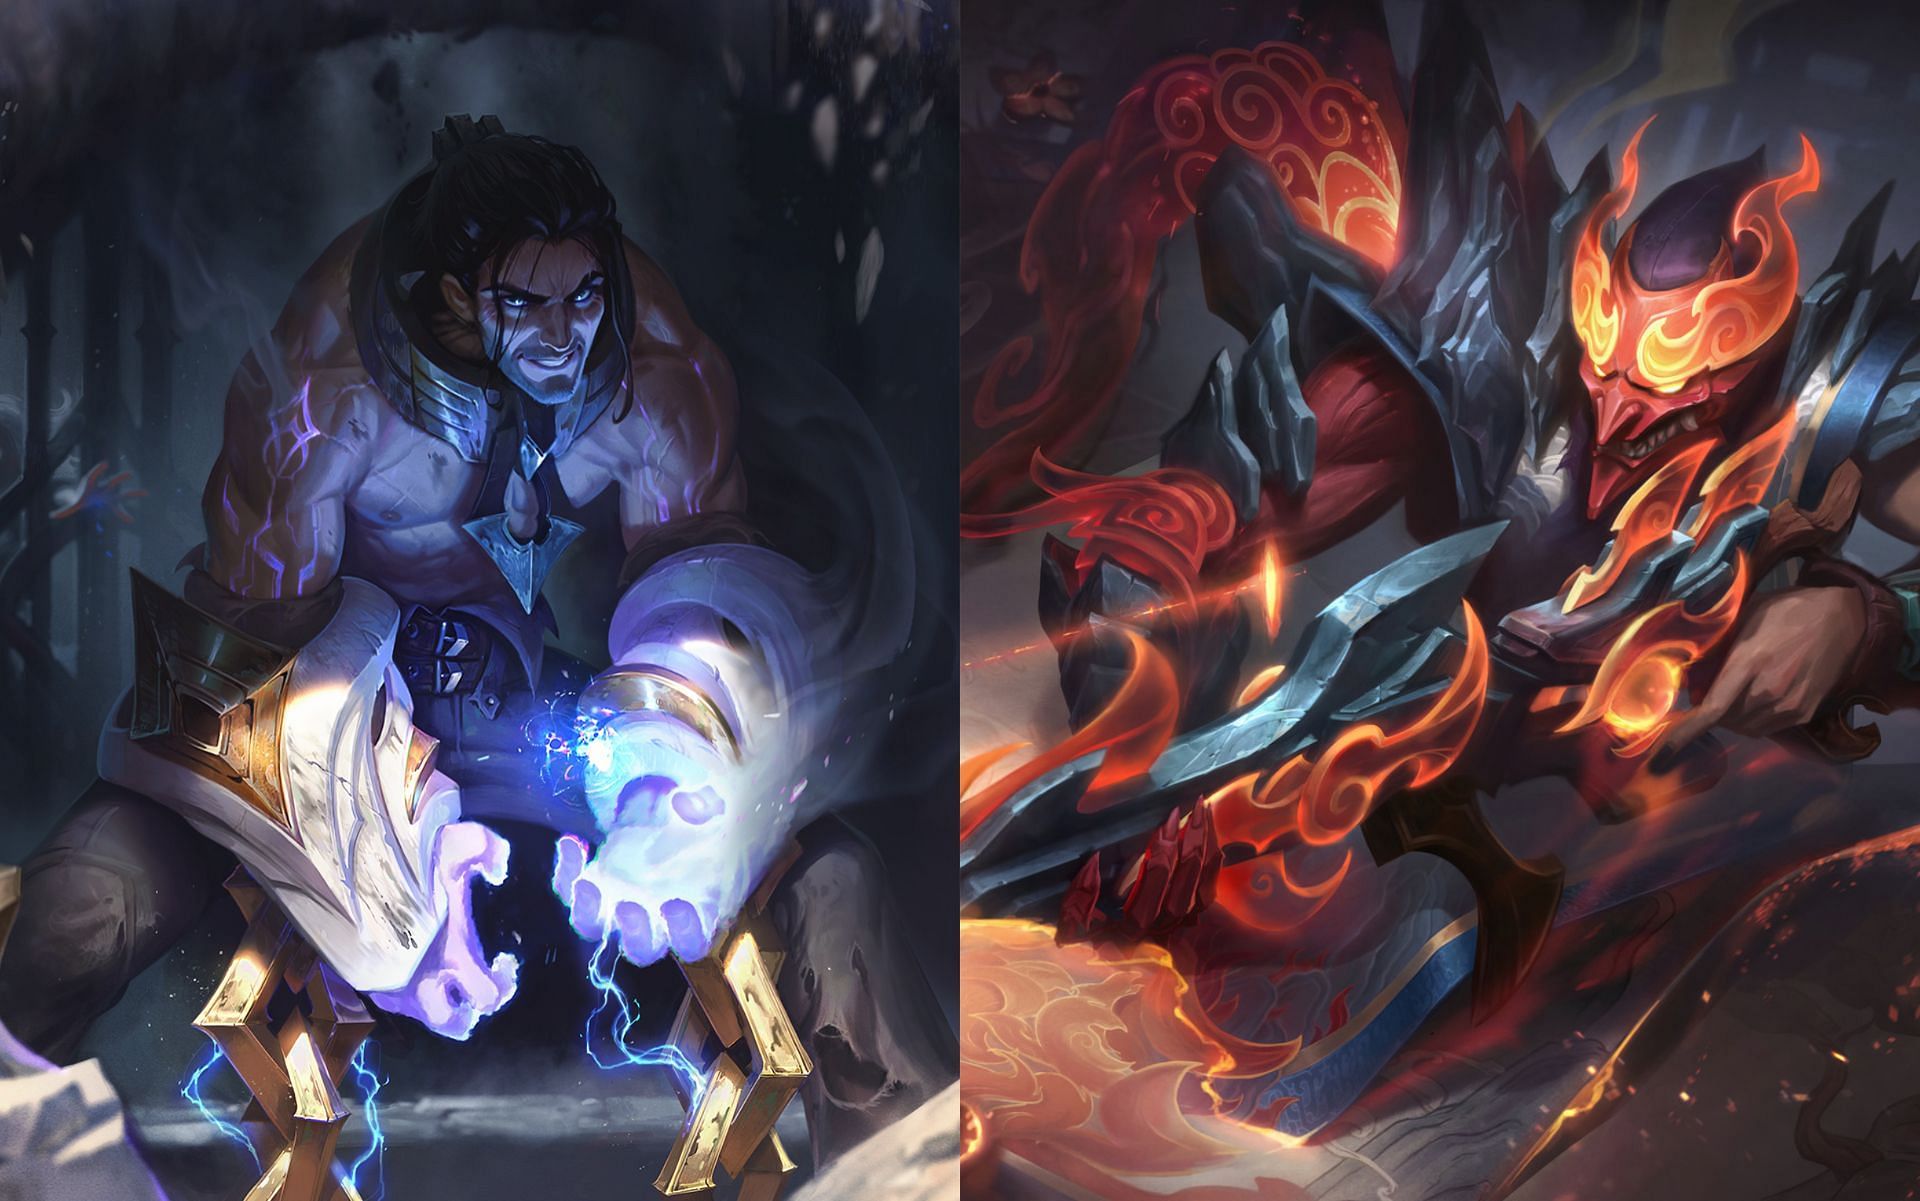 Jhin and Sylas are set to receive brand new skins in future updates (Image via Riot Games)